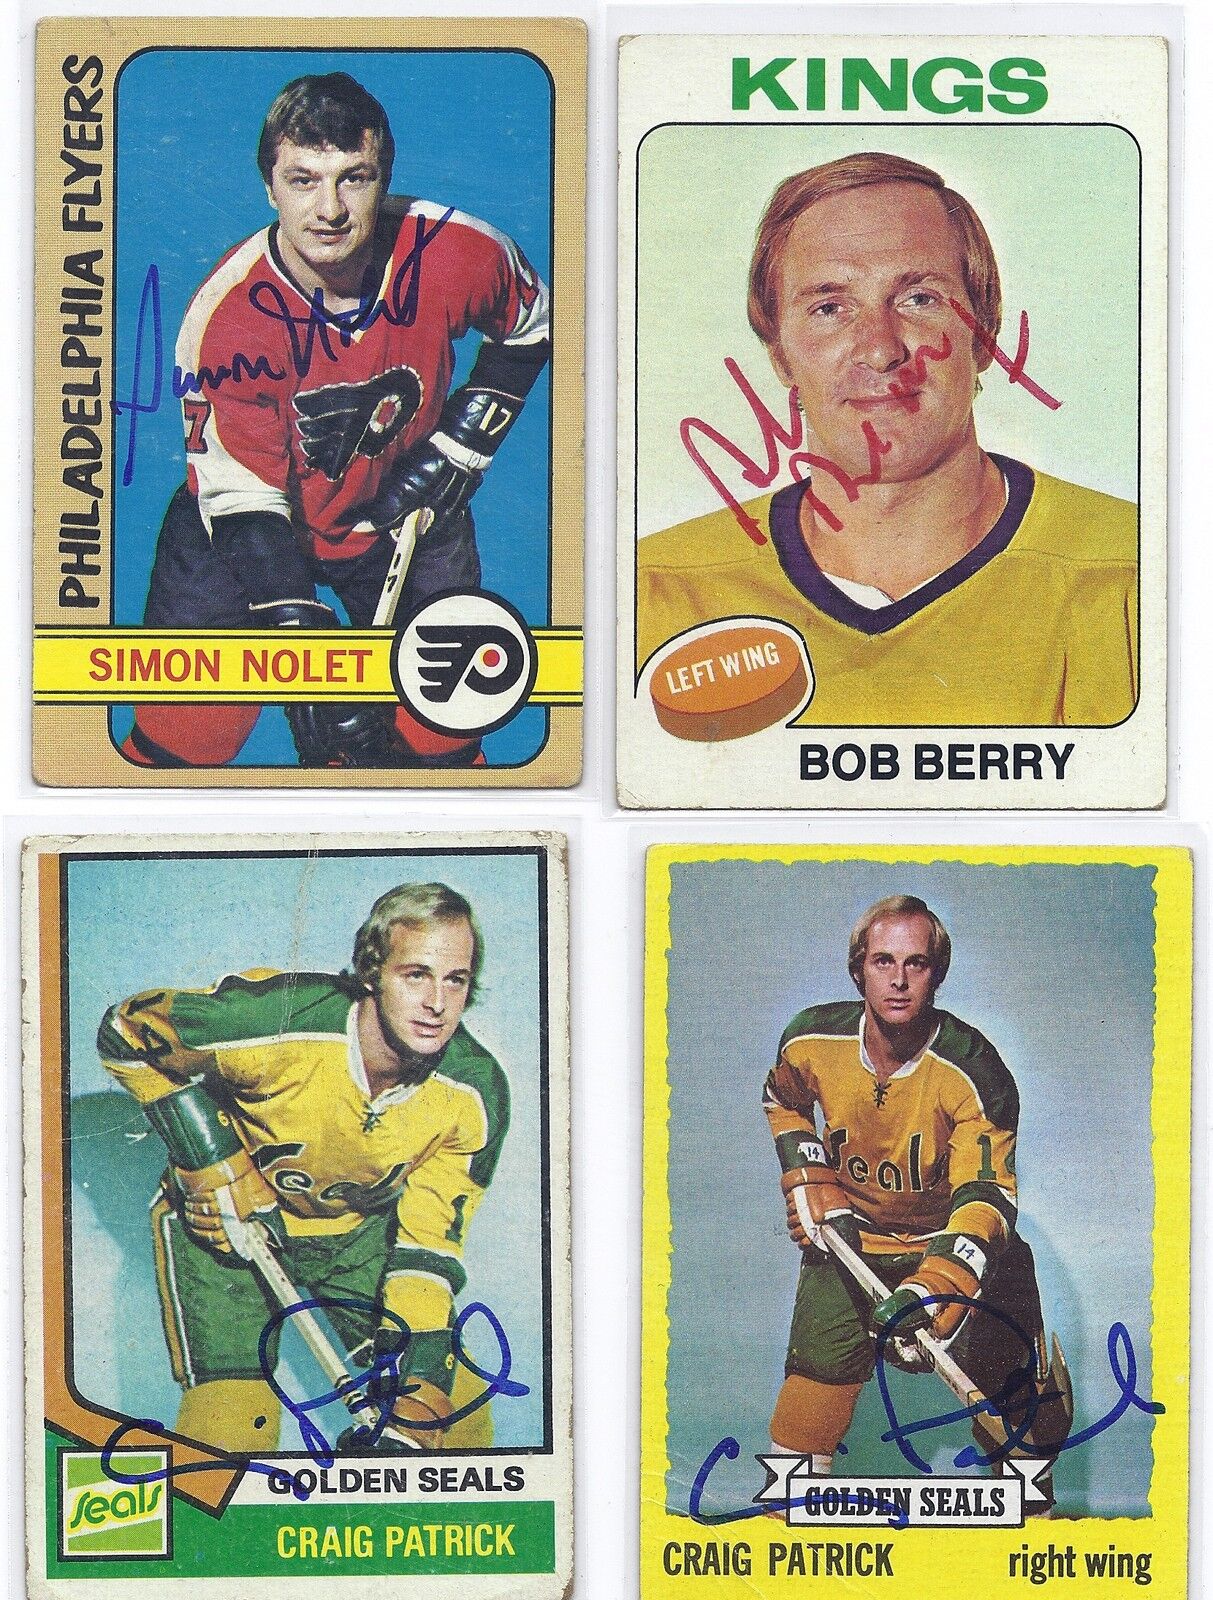 1975-76 Topps #196 Bob Berry Los Angeles Kings Autographed Hockey Card 